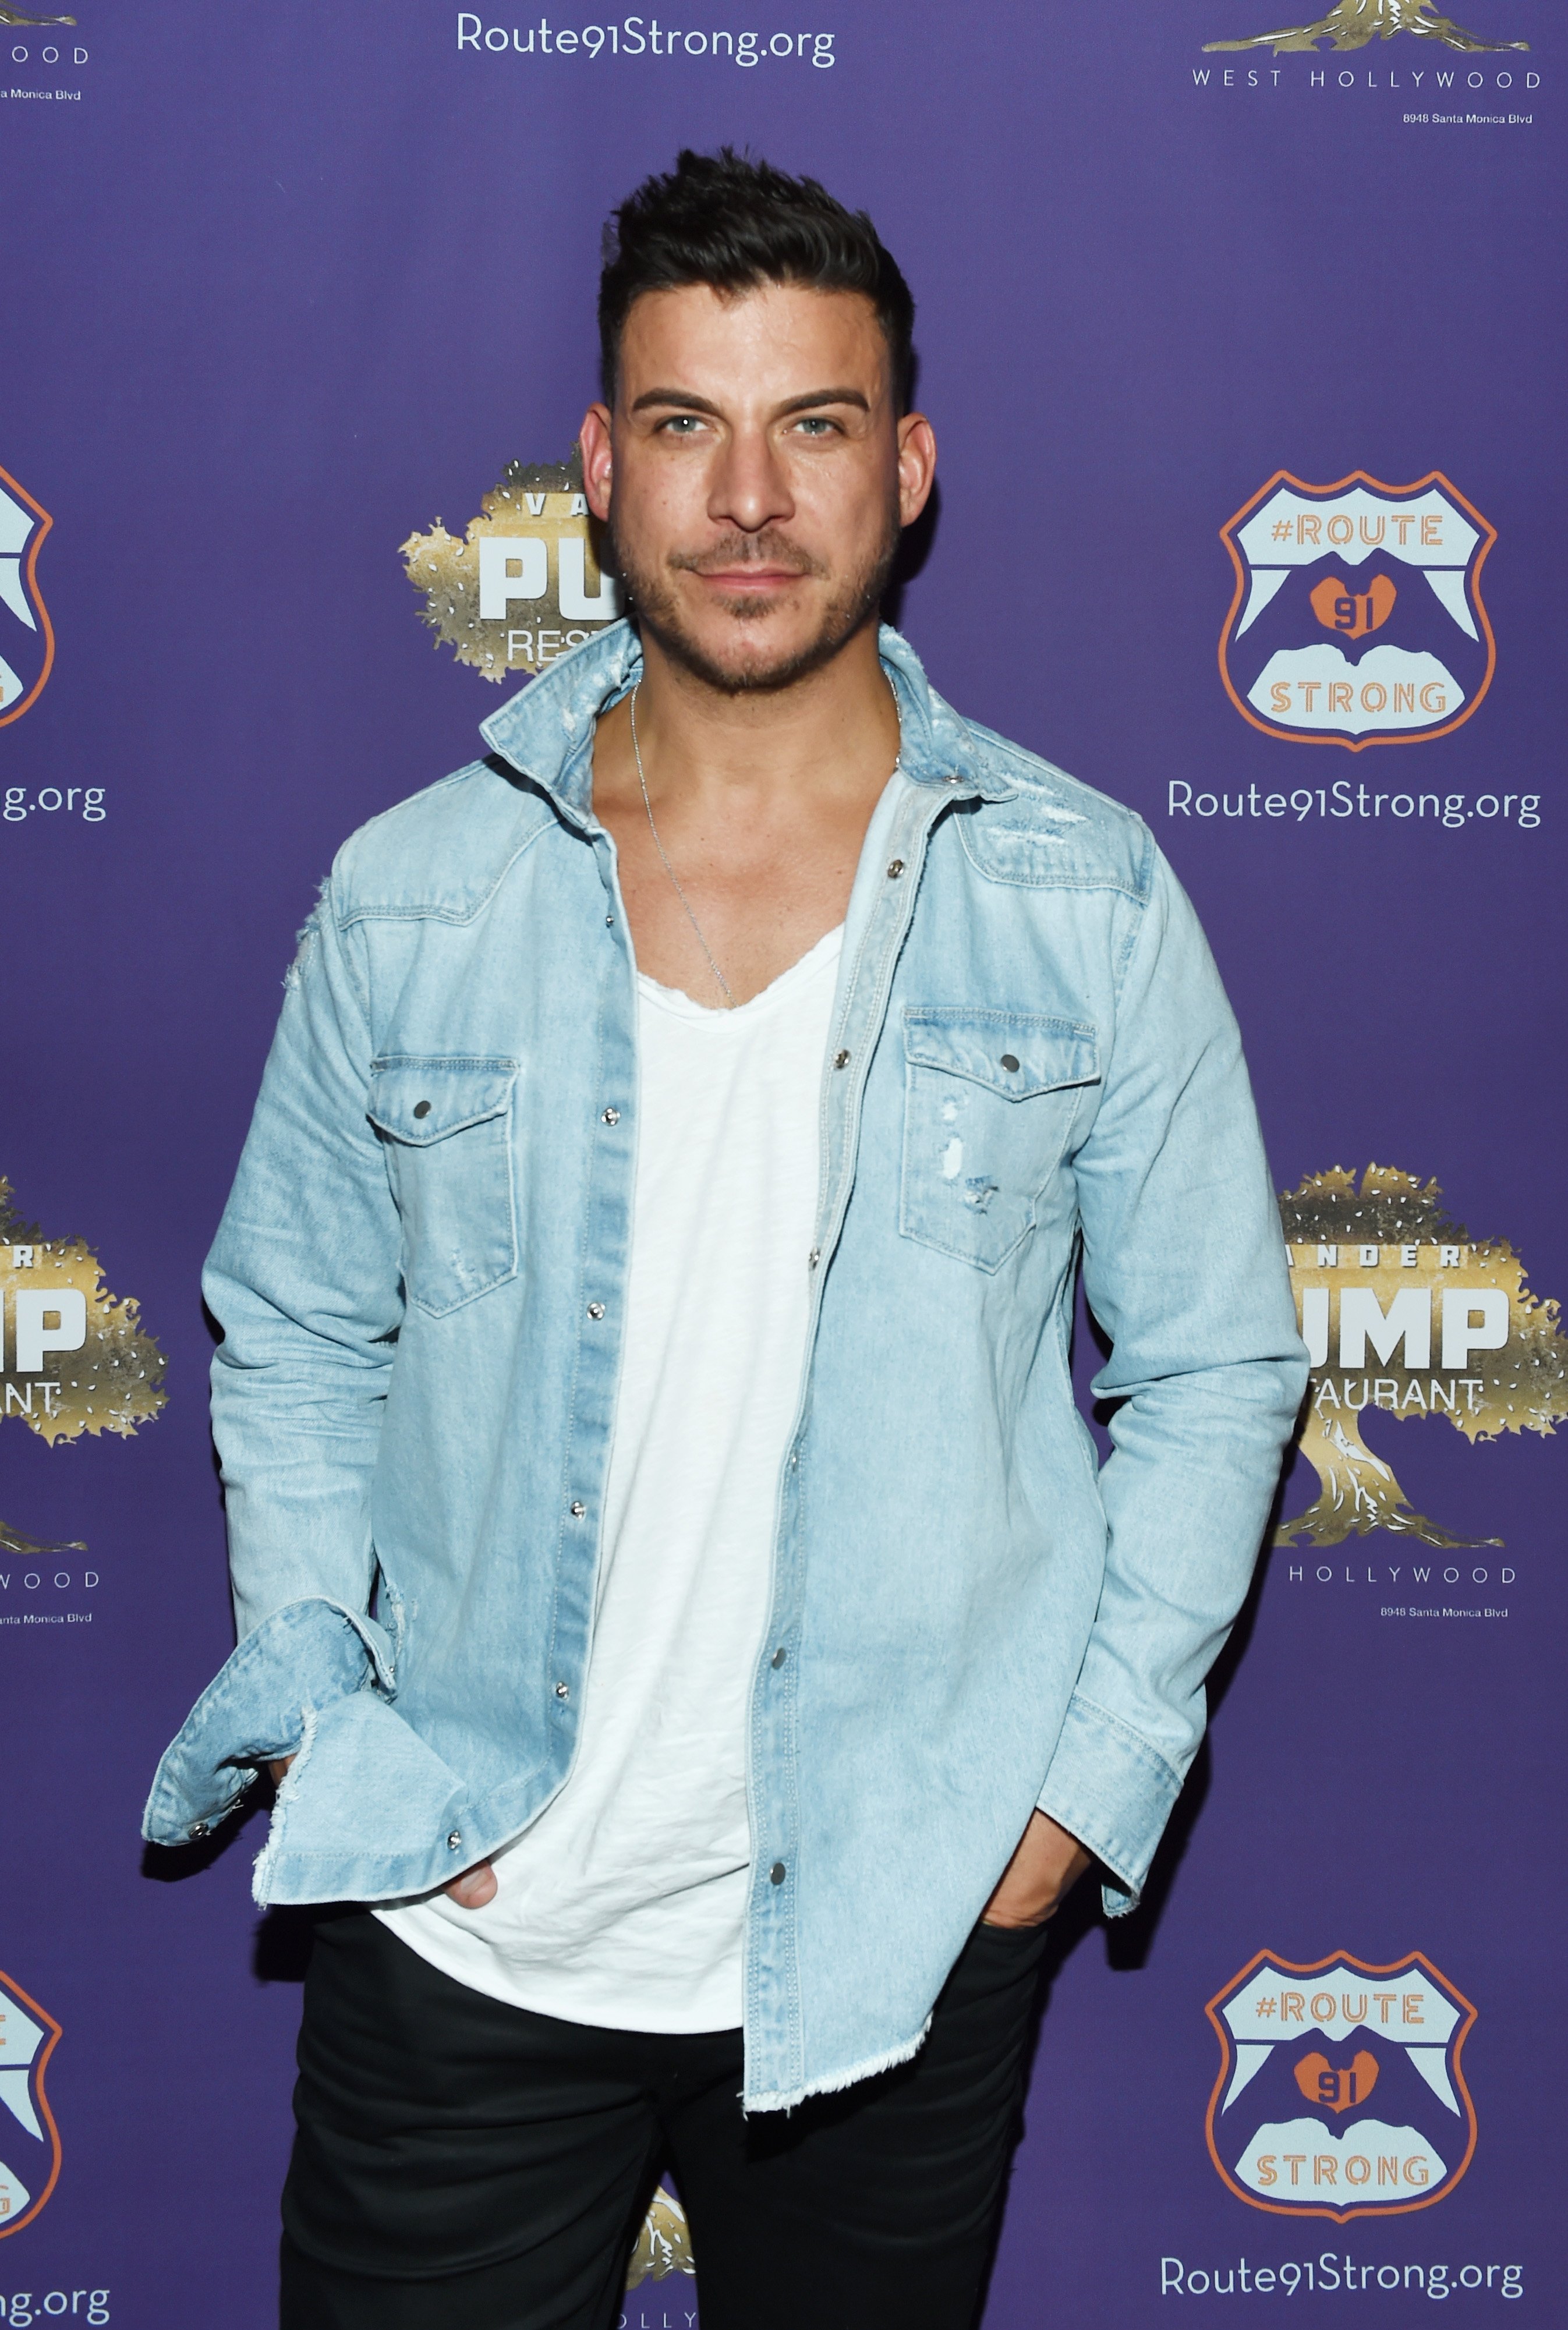  Television personality Jax Taylor attends the 1st annniversary fundraiser for the victims of the October 1st, 2017 Las Vegas Shooting hosted by Lisa Vanderpump and Route91Strong at Pump on October 1, 2018 in West Hollywood, California | Photo: Getty Images